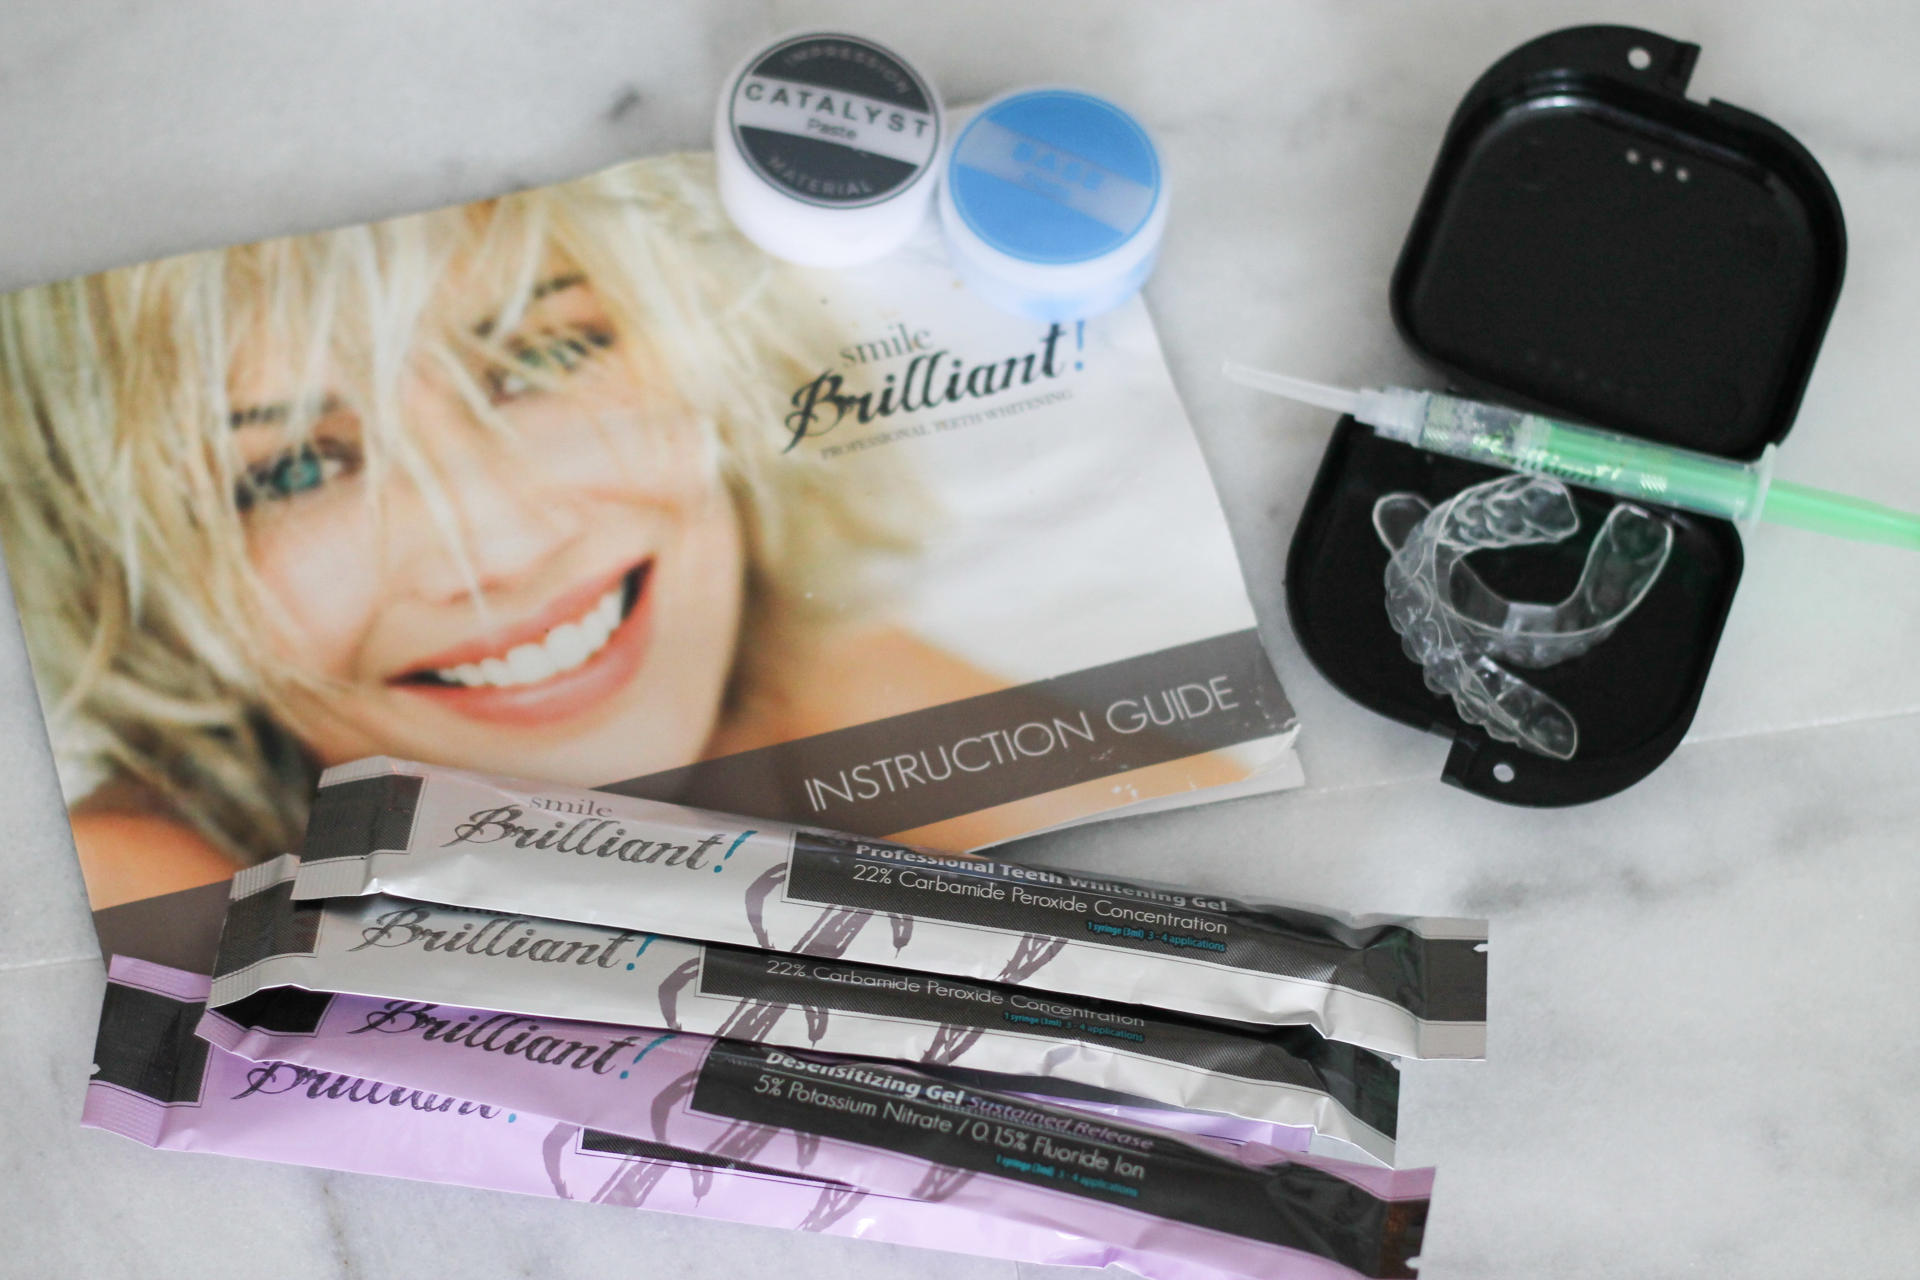 Smile Brilliant At Home Teeth Whitening by New Orleans style blogger Style Waltz